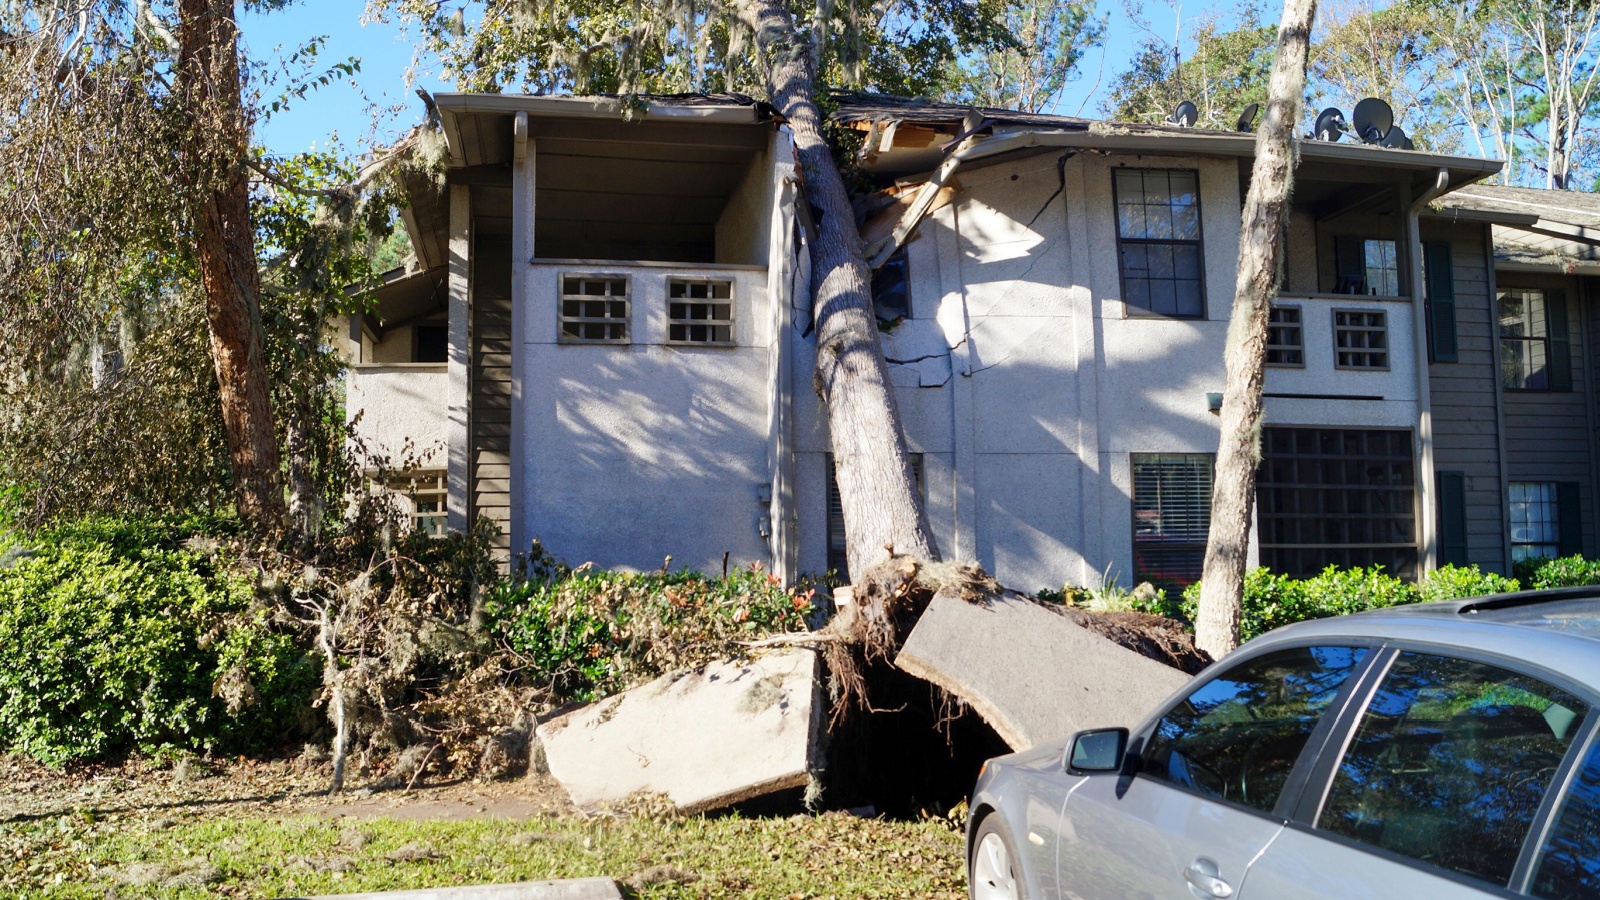 Tree on building roof and damage from hurricane tropical storm